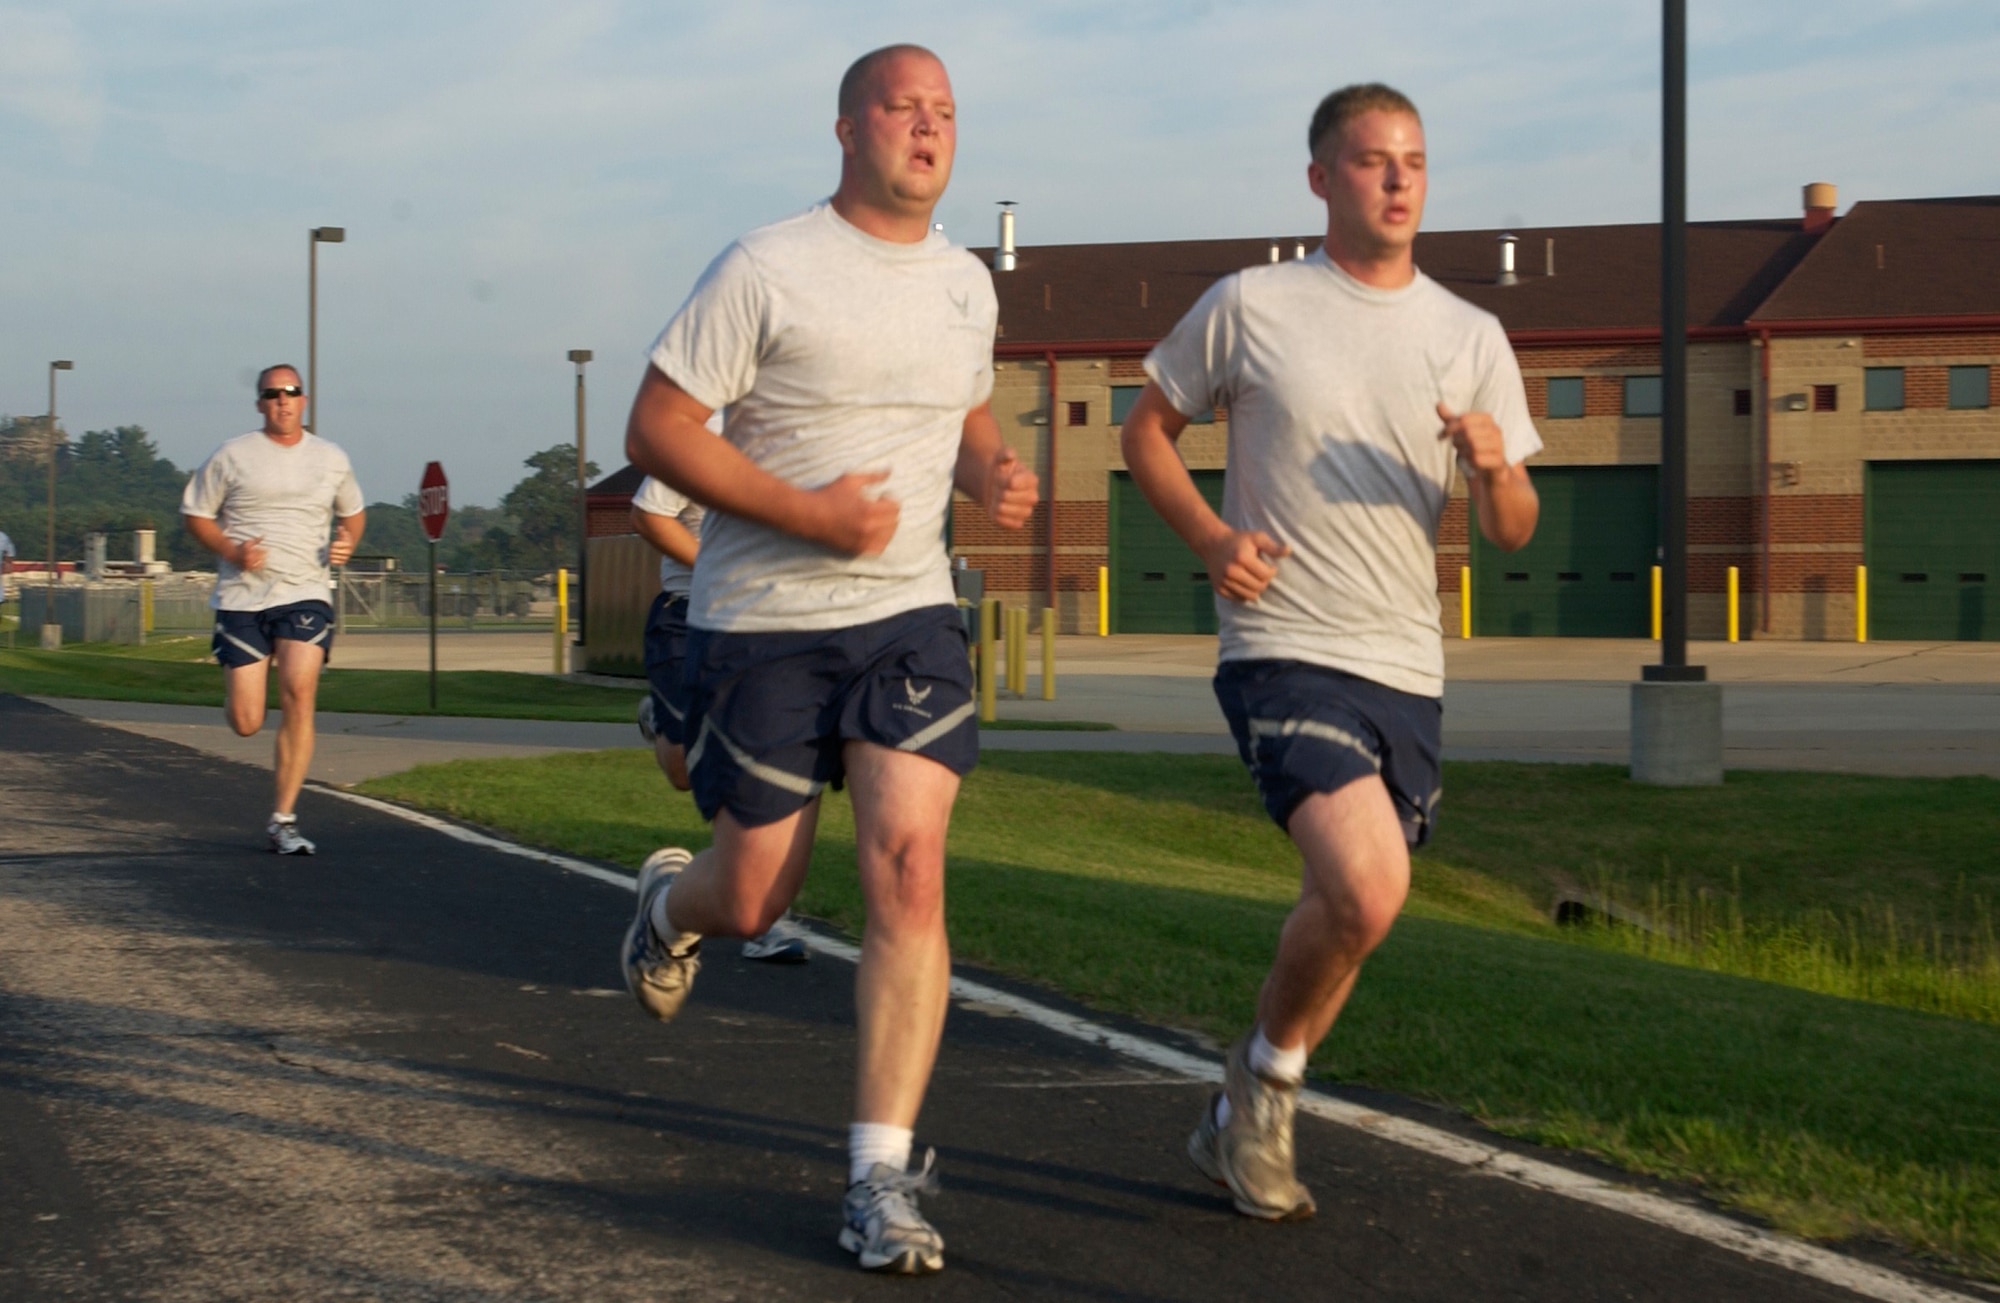 Senior Airman Brian Householder (right) and Senior Airman Dan Gish  of the 133rd Test Squadron  (TS) based in Fort Dodge, Iowa complete the 1.5 mile run as part of the annual Physical Fitness test.  Airmen from the 133rd TS, Iowa Air National Guard, are at the Volk field combat readiness training center, Wisconsin as part of their two week annual training.

USAF Photo by MSgt Mike Battien
Iowa  JFHQ Public Affairs  

